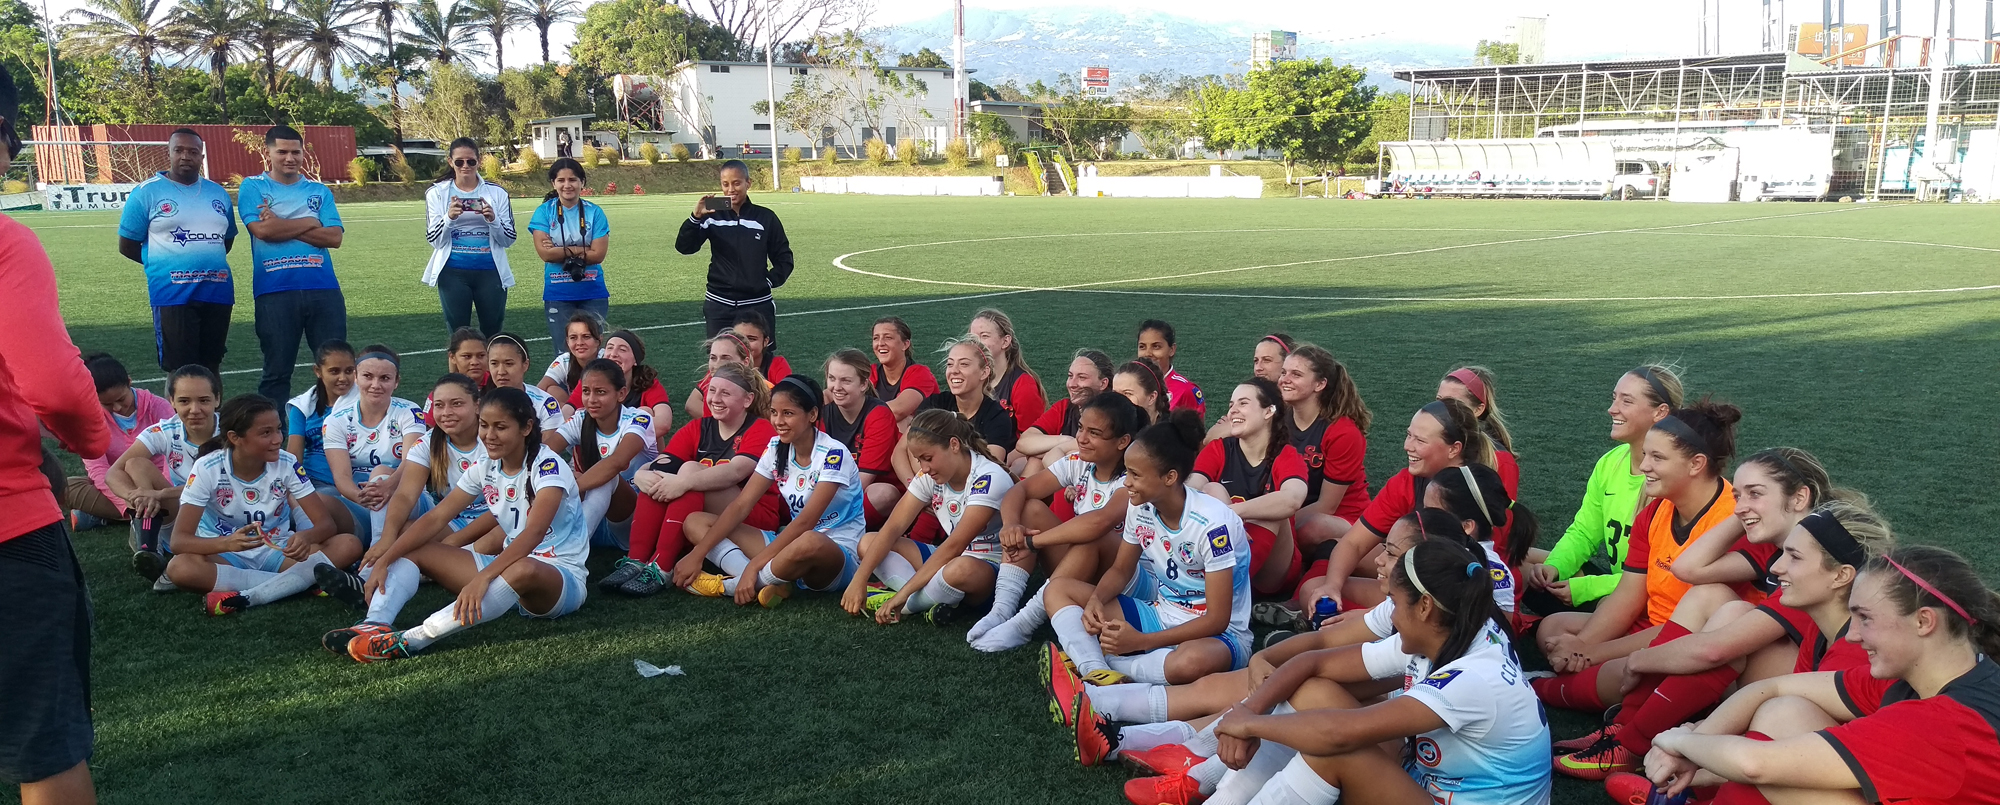 The women's soccer team played a pair of international friendlies and took part in service-learning opportunities on its trip to Costa Rica over spring break.